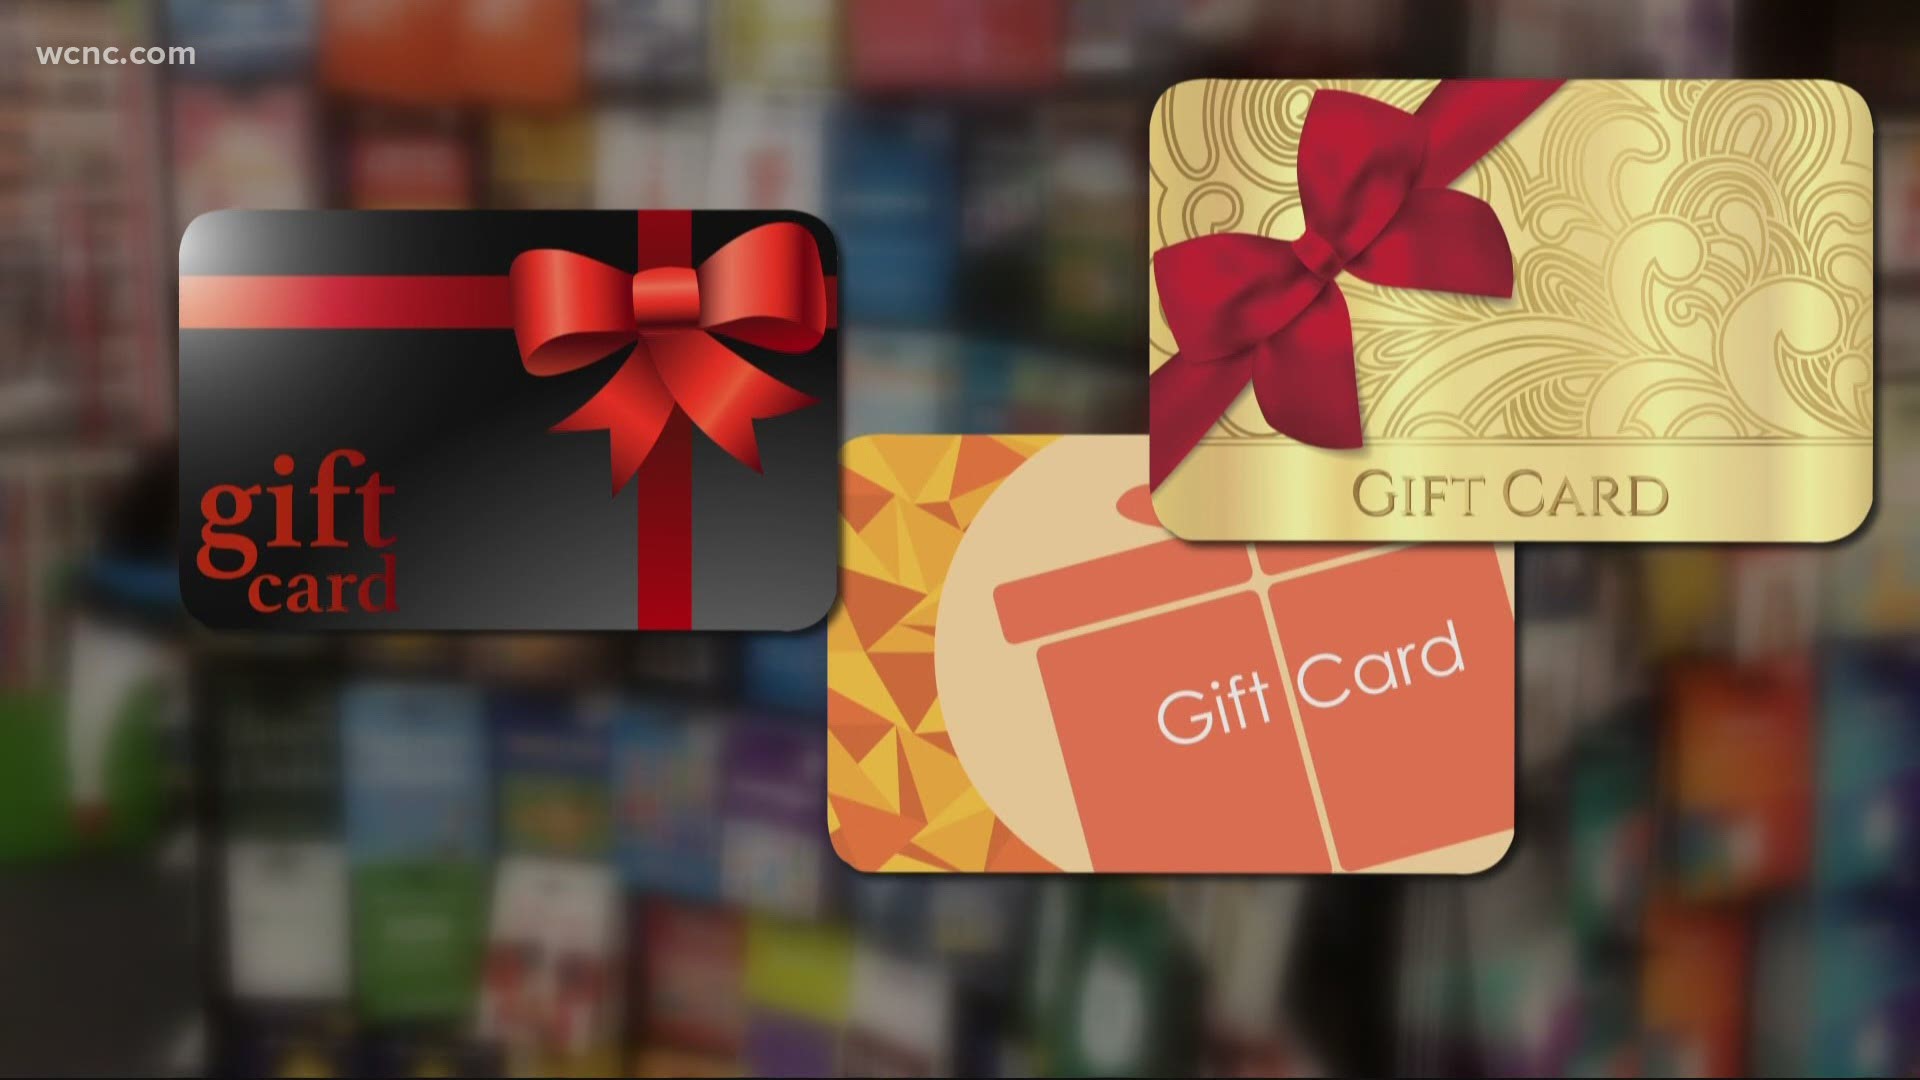 If you get a gift card for the holidays that you won't use, turn that unwanted gift into cash.